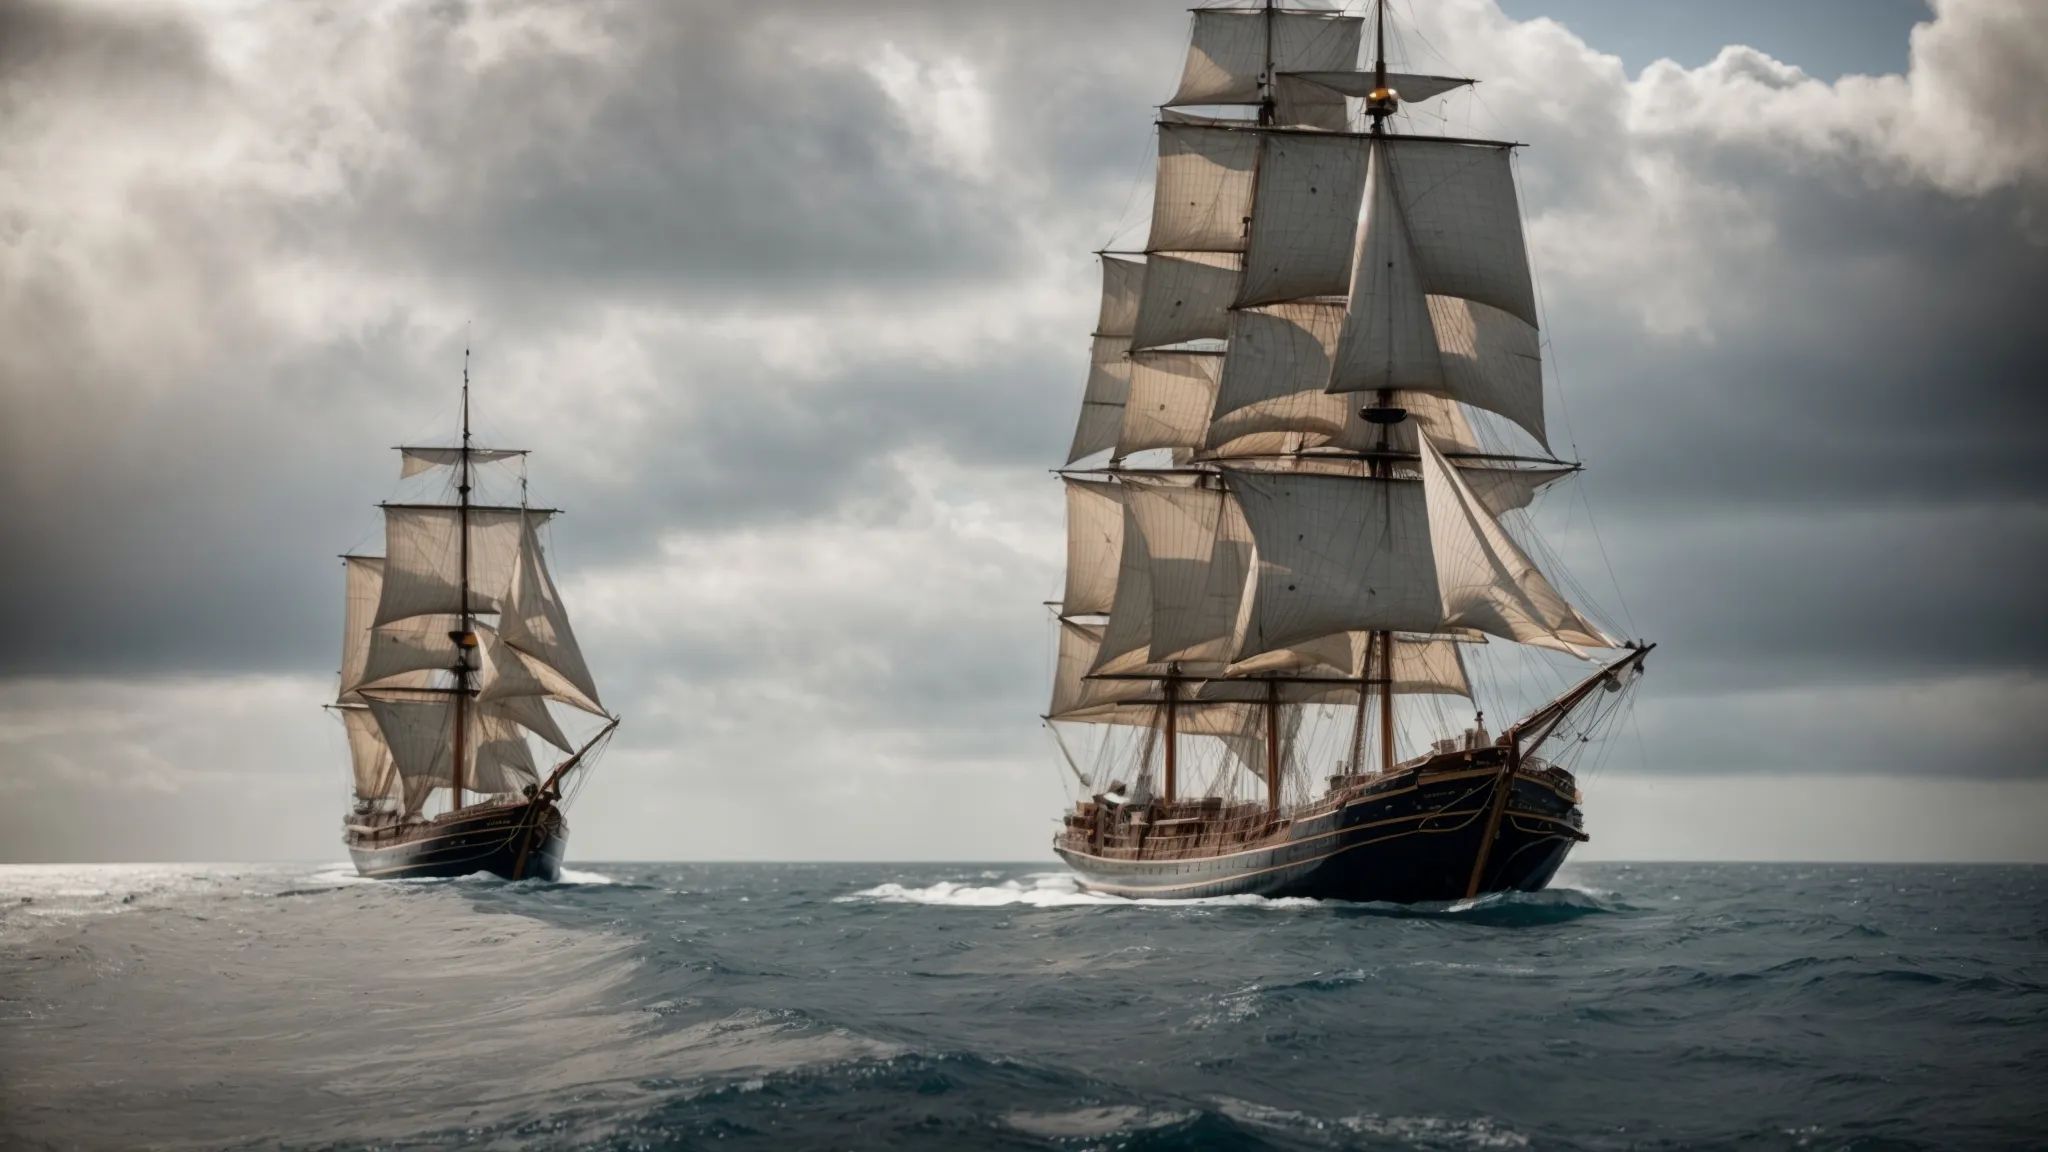 two majestic sailing ships, symbols of cooperation and exploration, advance together through calm, open waters towards a distant, promising shore.